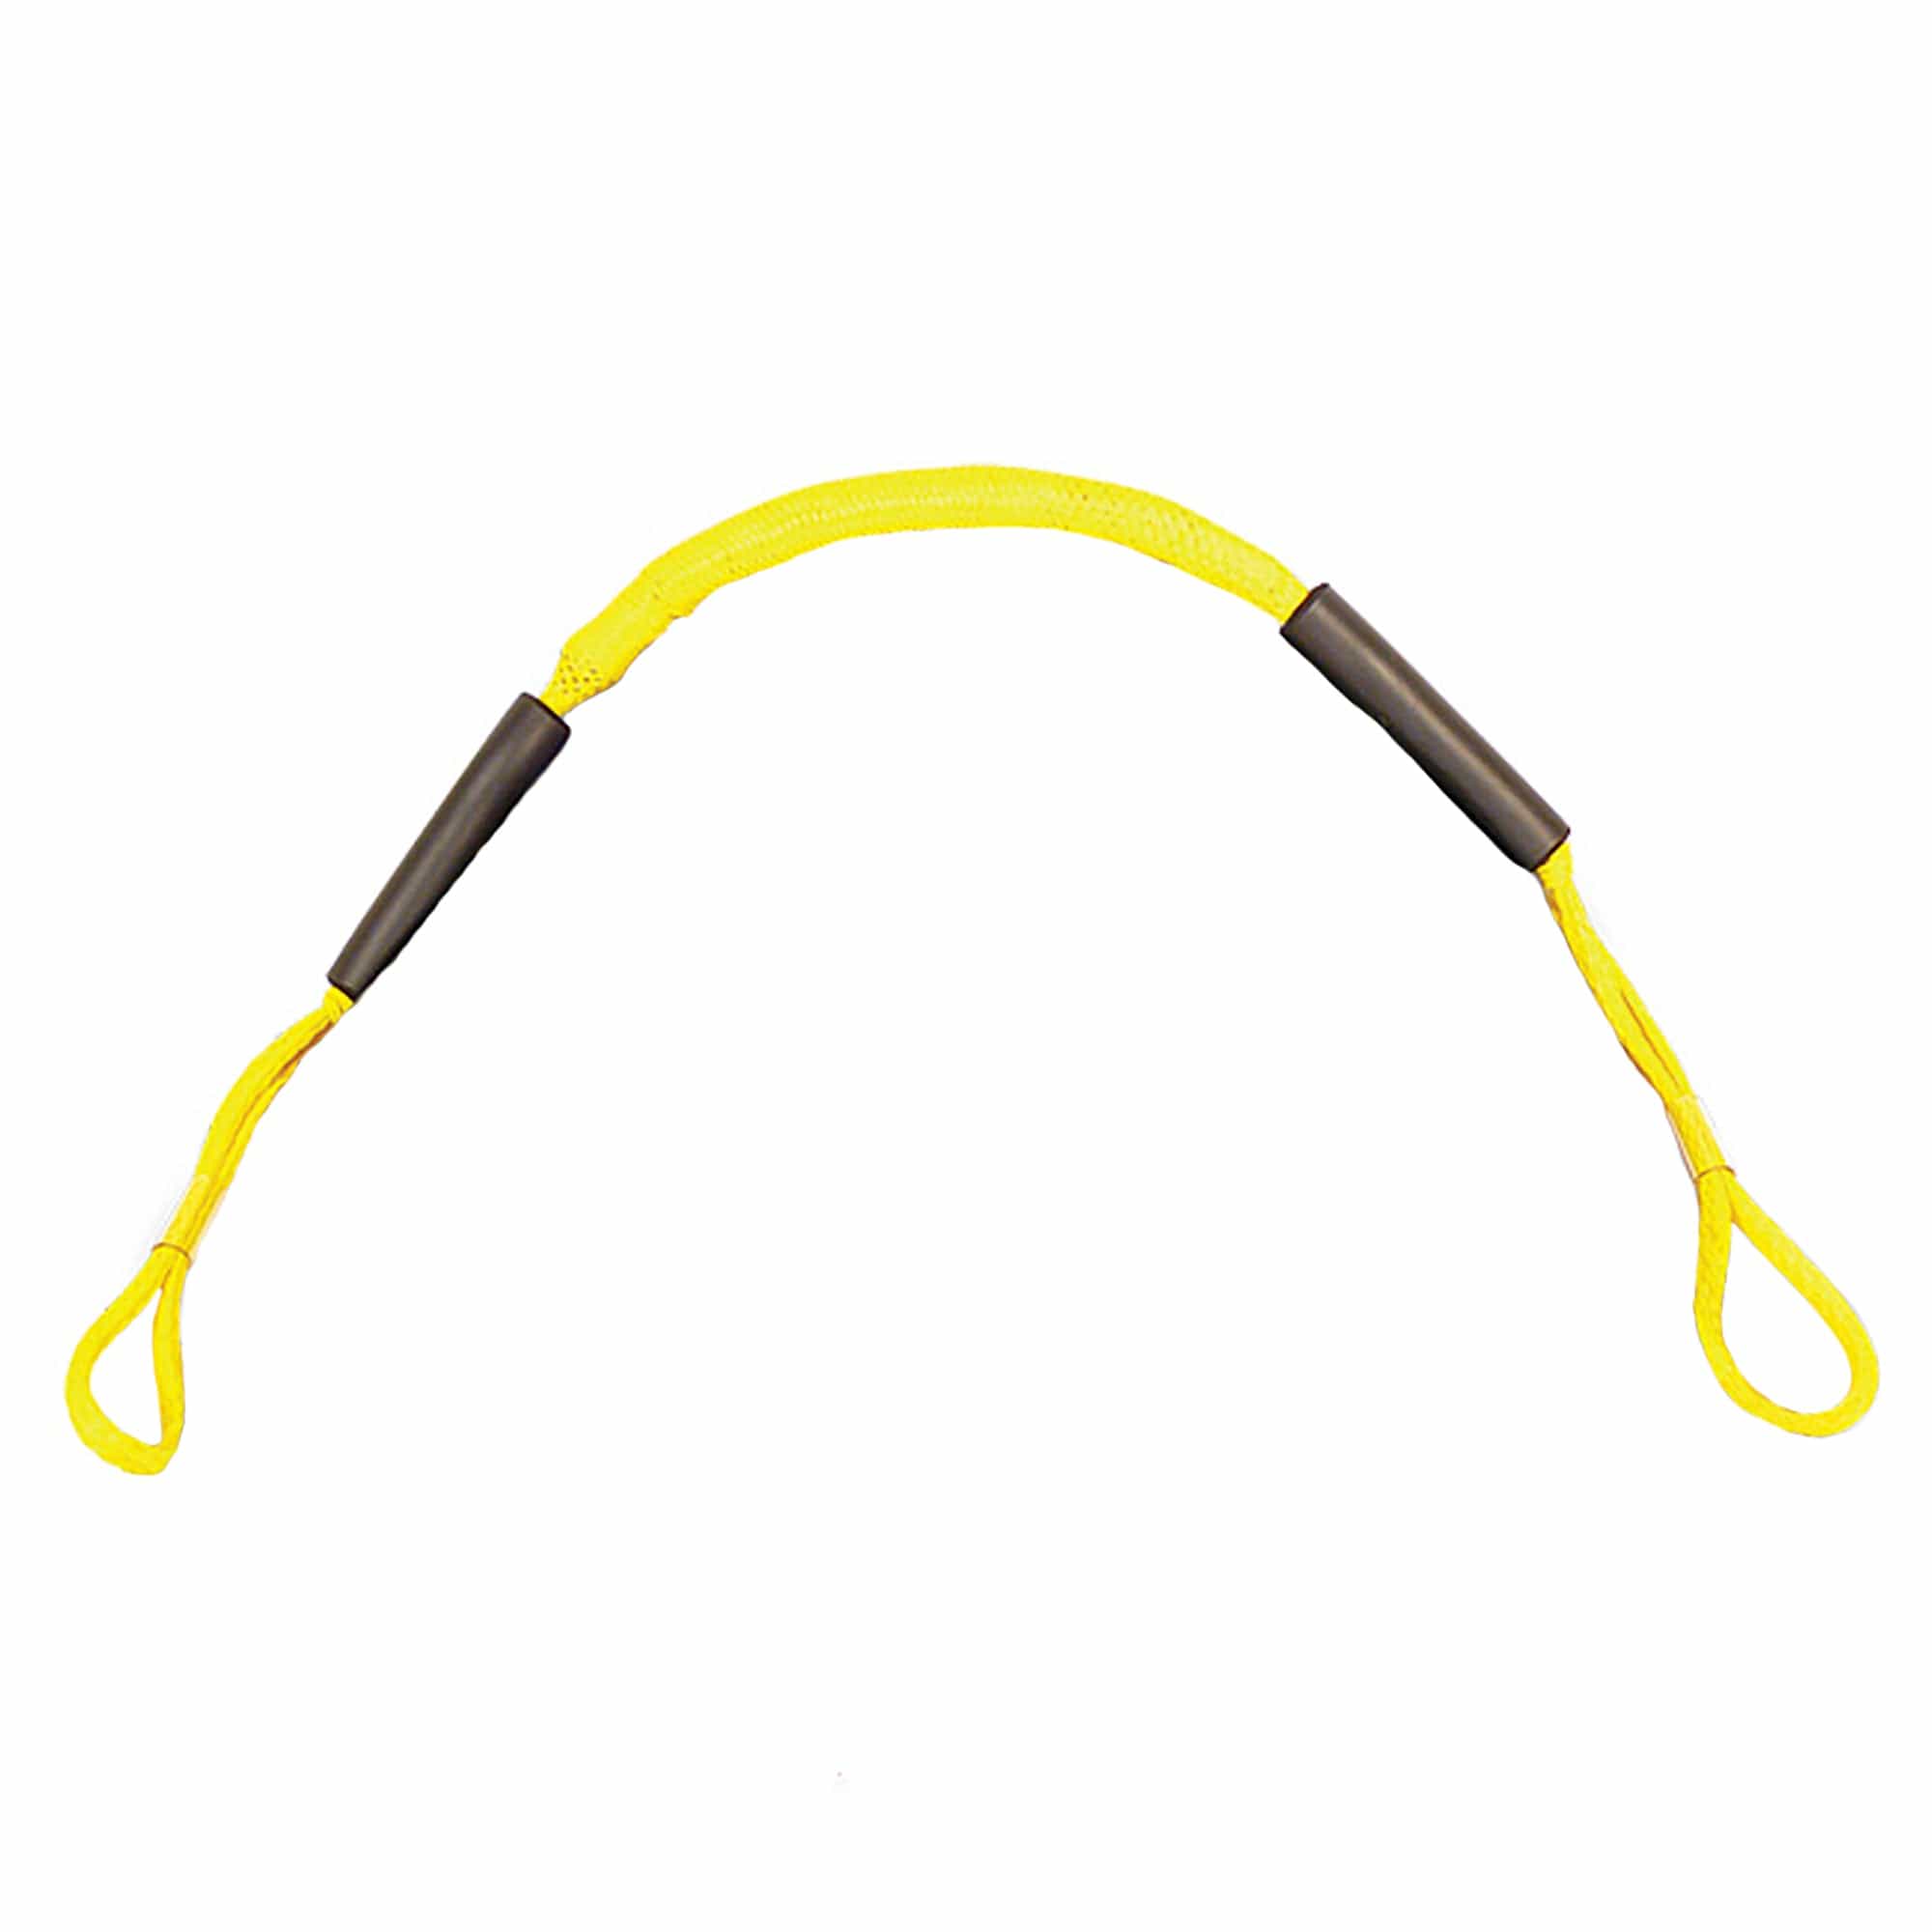 4' Dock Buddy - Yellow Bungie Cord Dock Line DB4-Y Greenfield Products